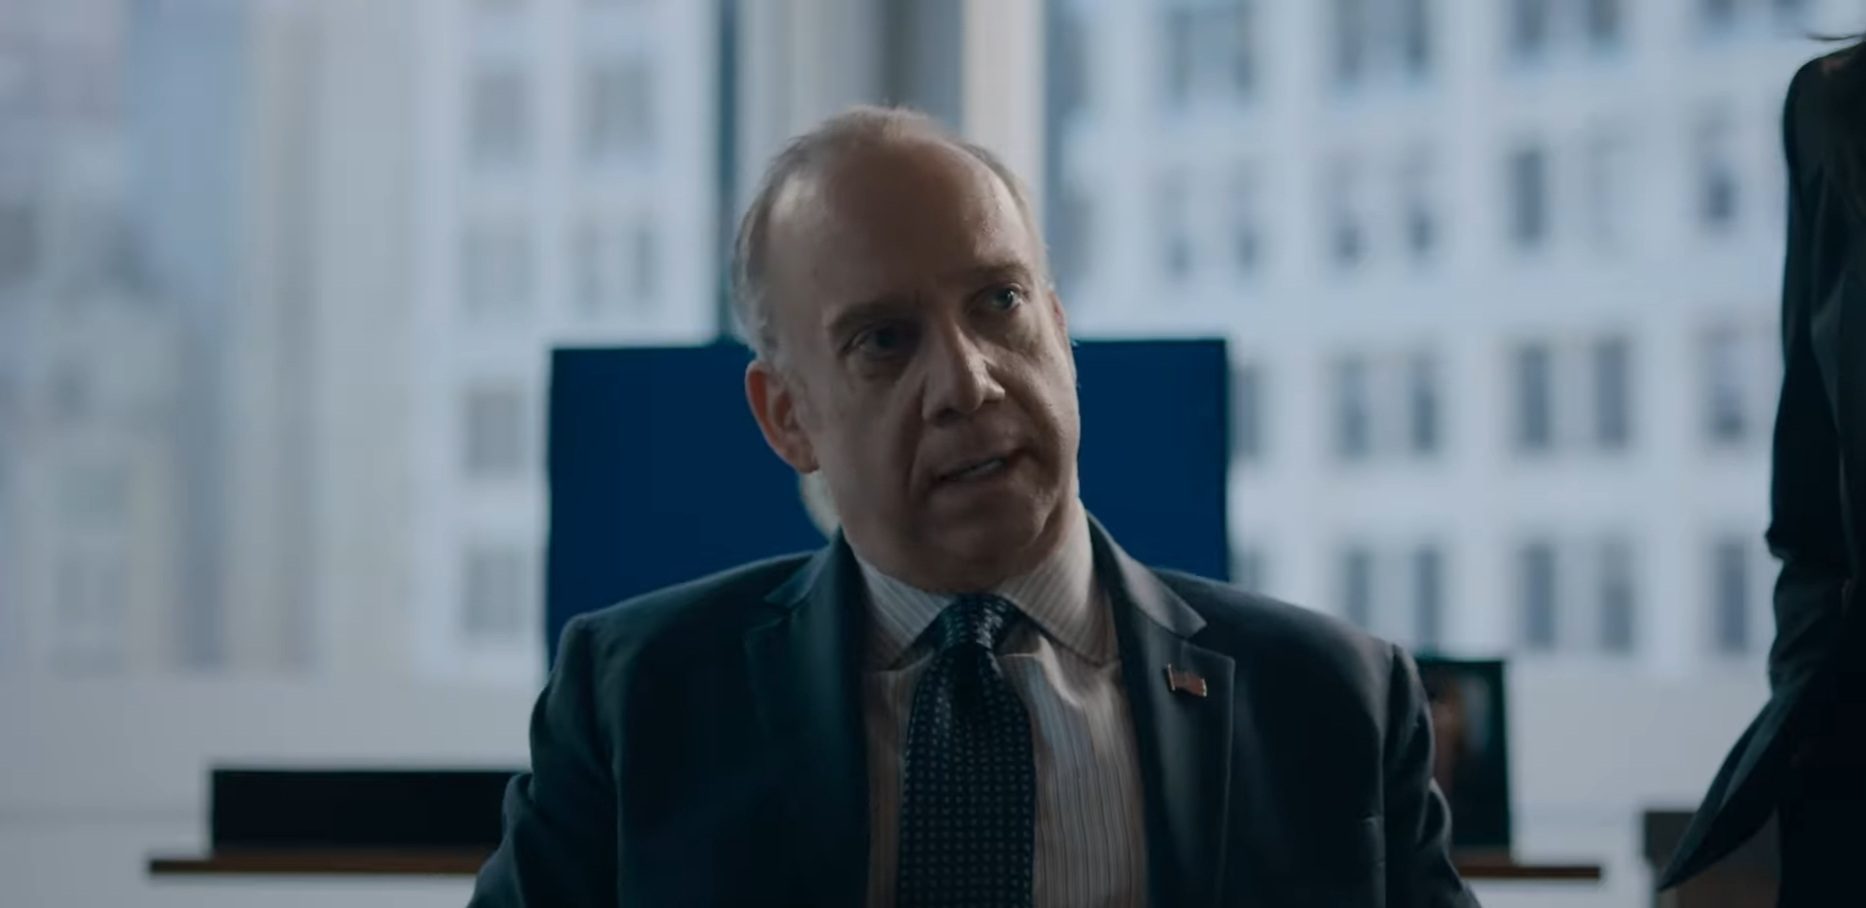 Who plays Chuck in billions